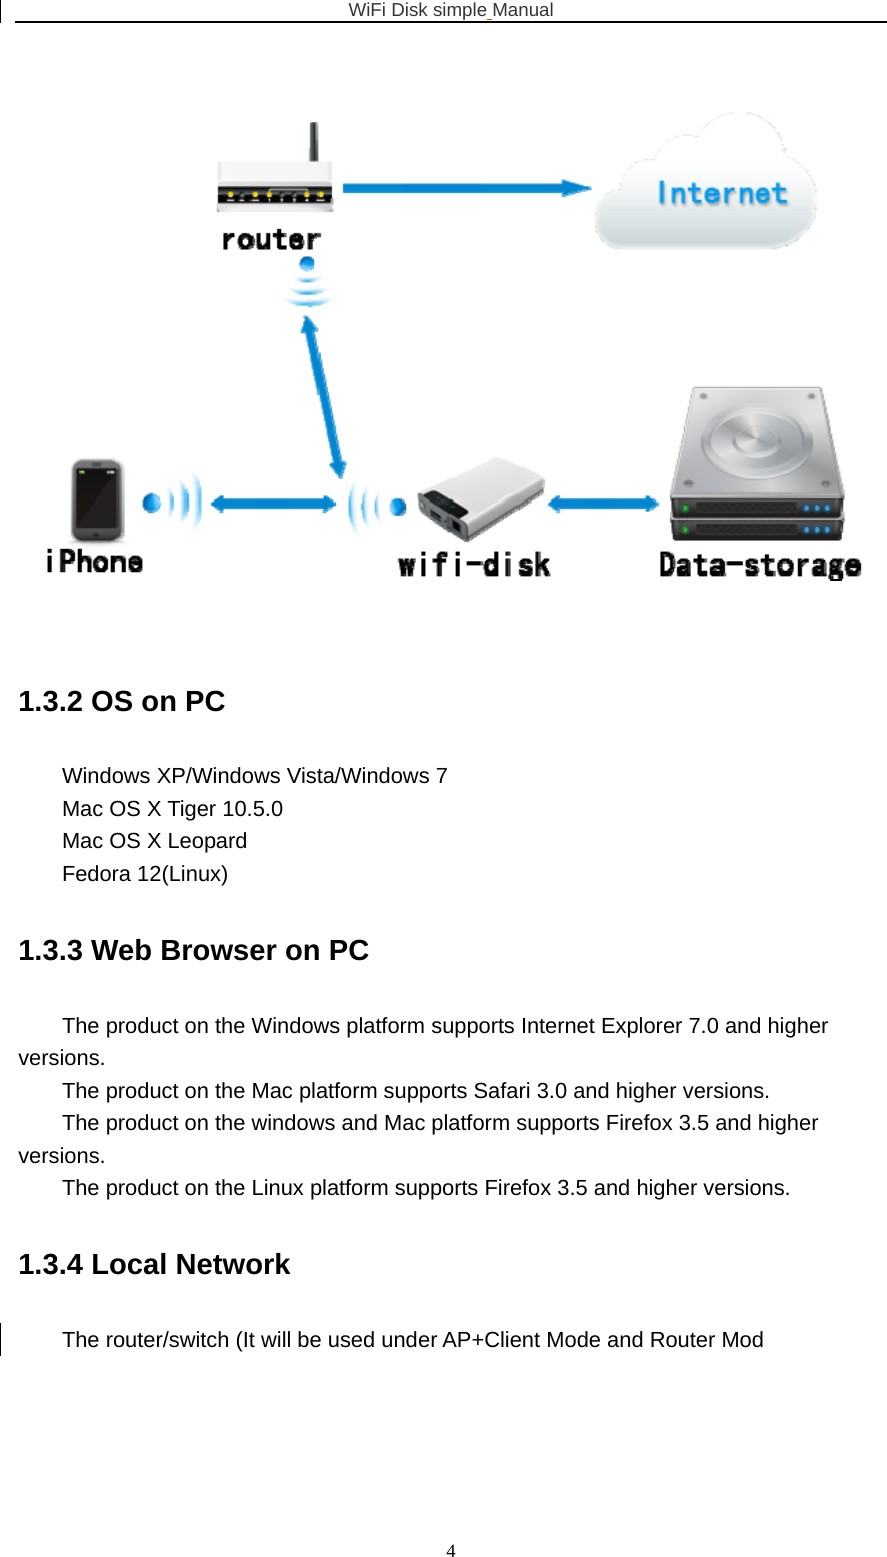 WiFi Disk simple Manual  4 1.3.2 OS on PC Windows XP/Windows Vista/Windows 7 Mac OS X Tiger 10.5.0 Mac OS X Leopard Fedora 12(Linux) 1.3.3 Web Browser on PC The product on the Windows platform supports Internet Explorer 7.0 and higher versions. The product on the Mac platform supports Safari 3.0 and higher versions. The product on the windows and Mac platform supports Firefox 3.5 and higher versions. The product on the Linux platform supports Firefox 3.5 and higher versions. 1.3.4 Local Network The router/switch (It will be used under AP+Client Mode and Router Mod  